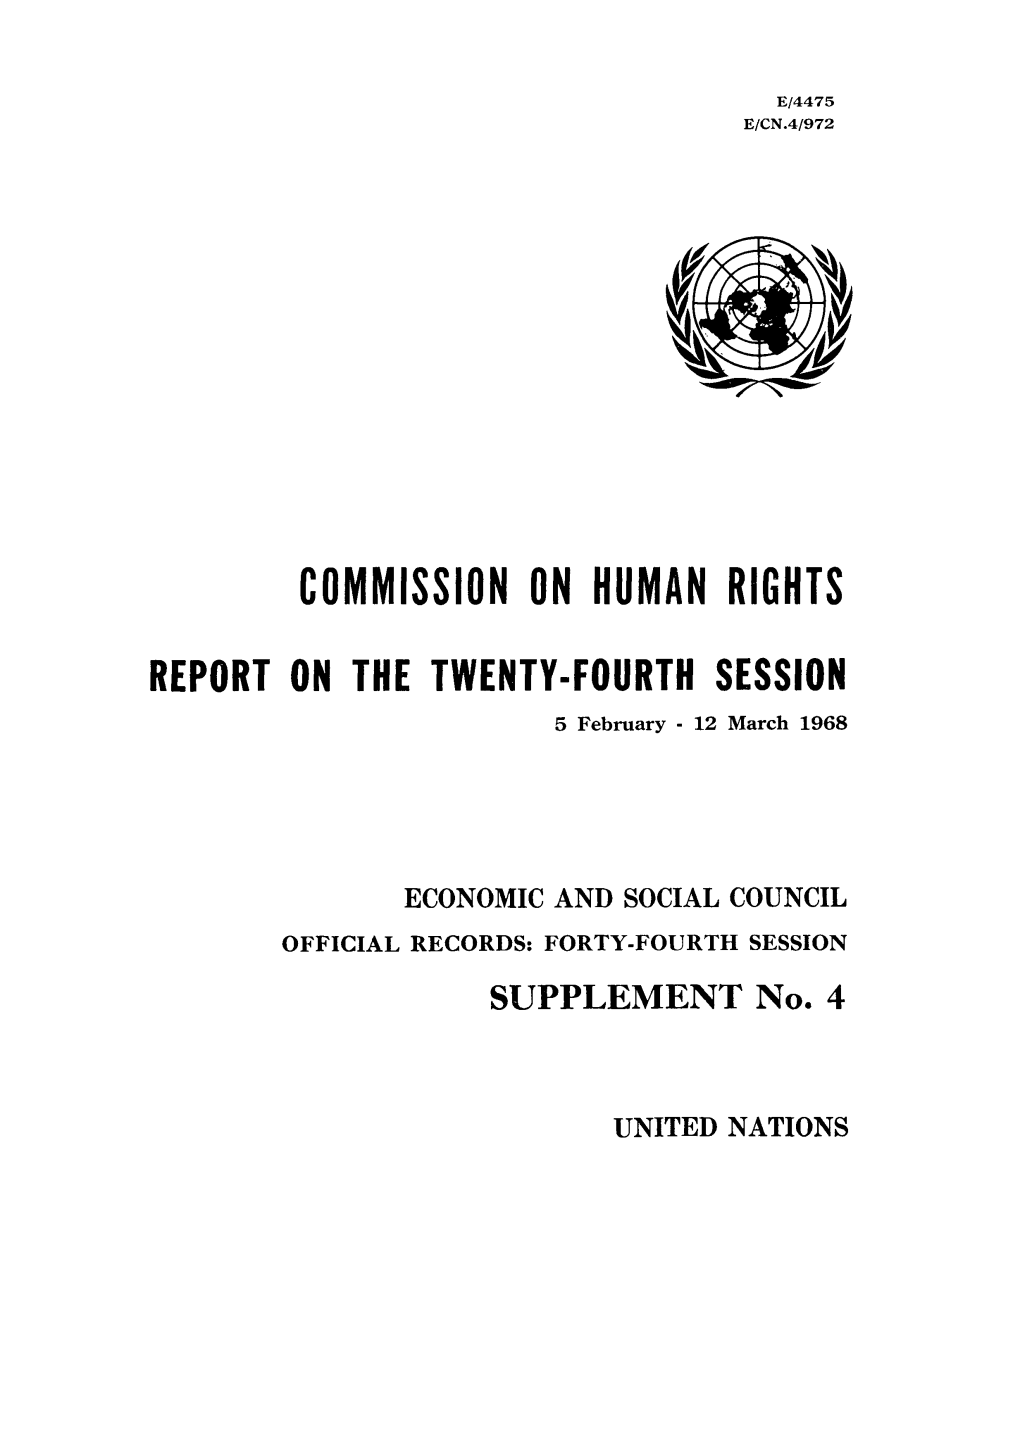 COMM!SS!ON on HUMAN RMHTS REPORT on the TWENTYFOURTH Session 5 February - 12 March 1968